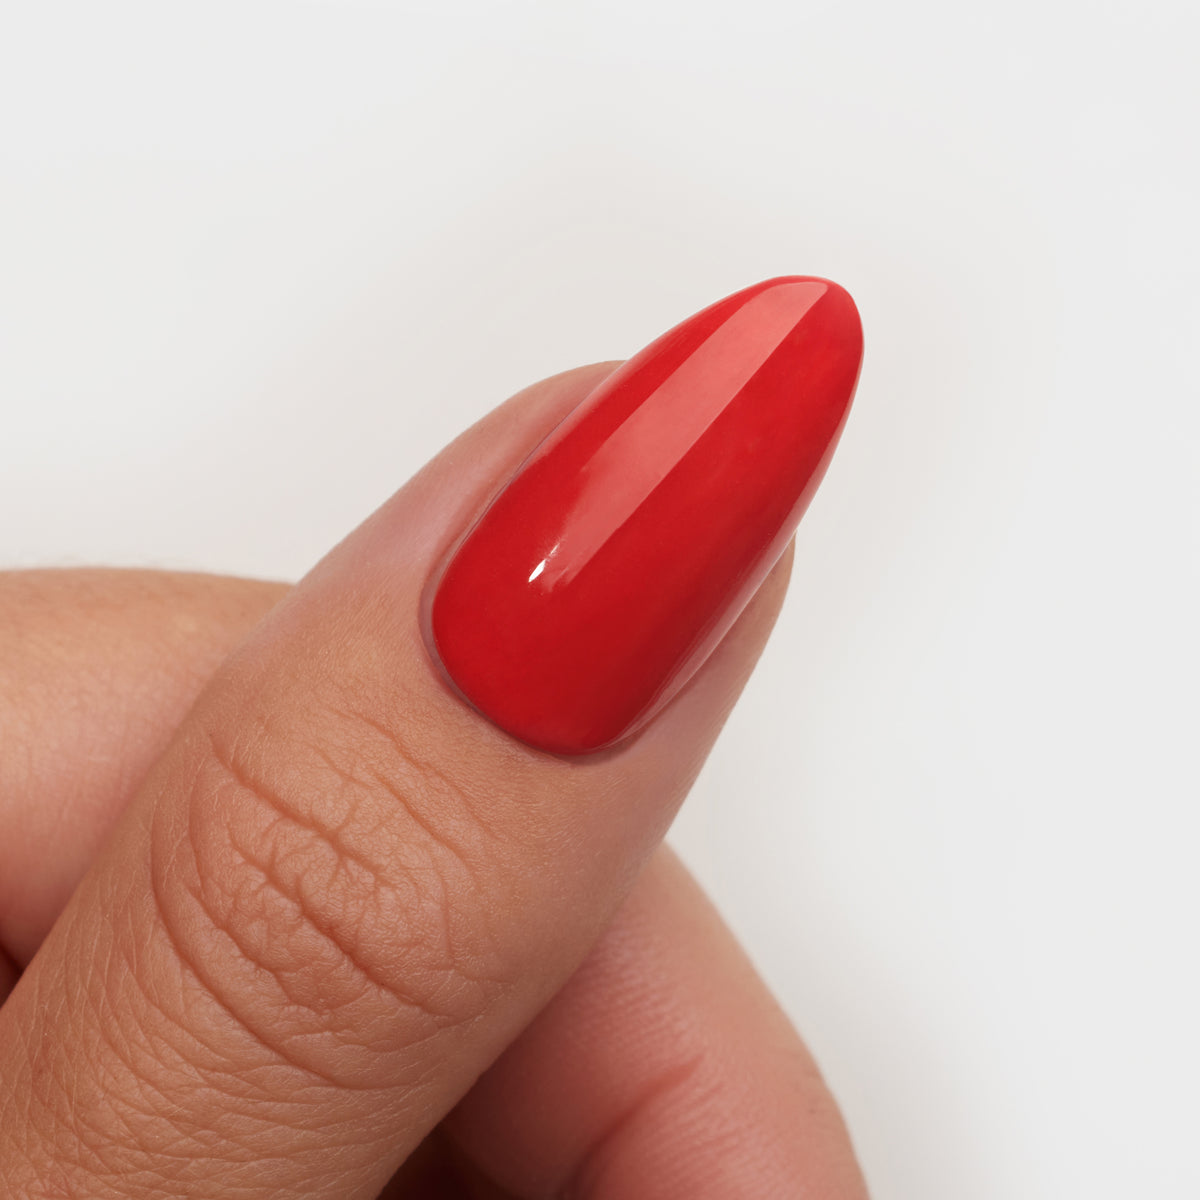 Gelous Red Sass gel nail polish swatch - photographed in Australia